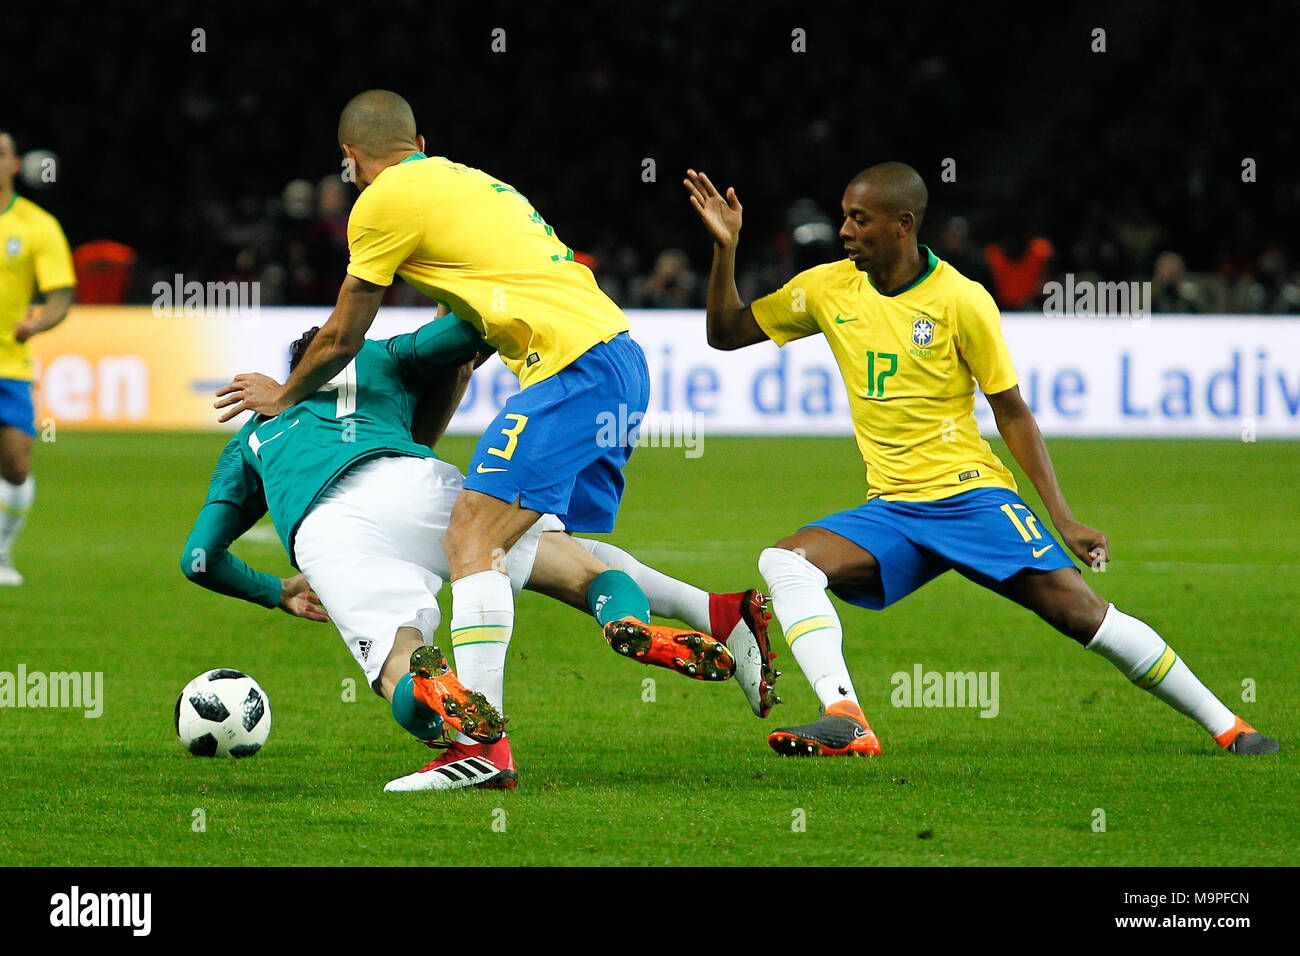 Berlin, Germany. 27th March, 2018. Miranda do Brasil dispute with Leon of Germany during match in the Olympic stadium of Berlin this Tuesday, 27. (PHOTO: DOUGLAS PINGITURO/BRAZIL PHOTO PRESS) Credit: Brazil Photo Press/Alamy Live News Stock Photo